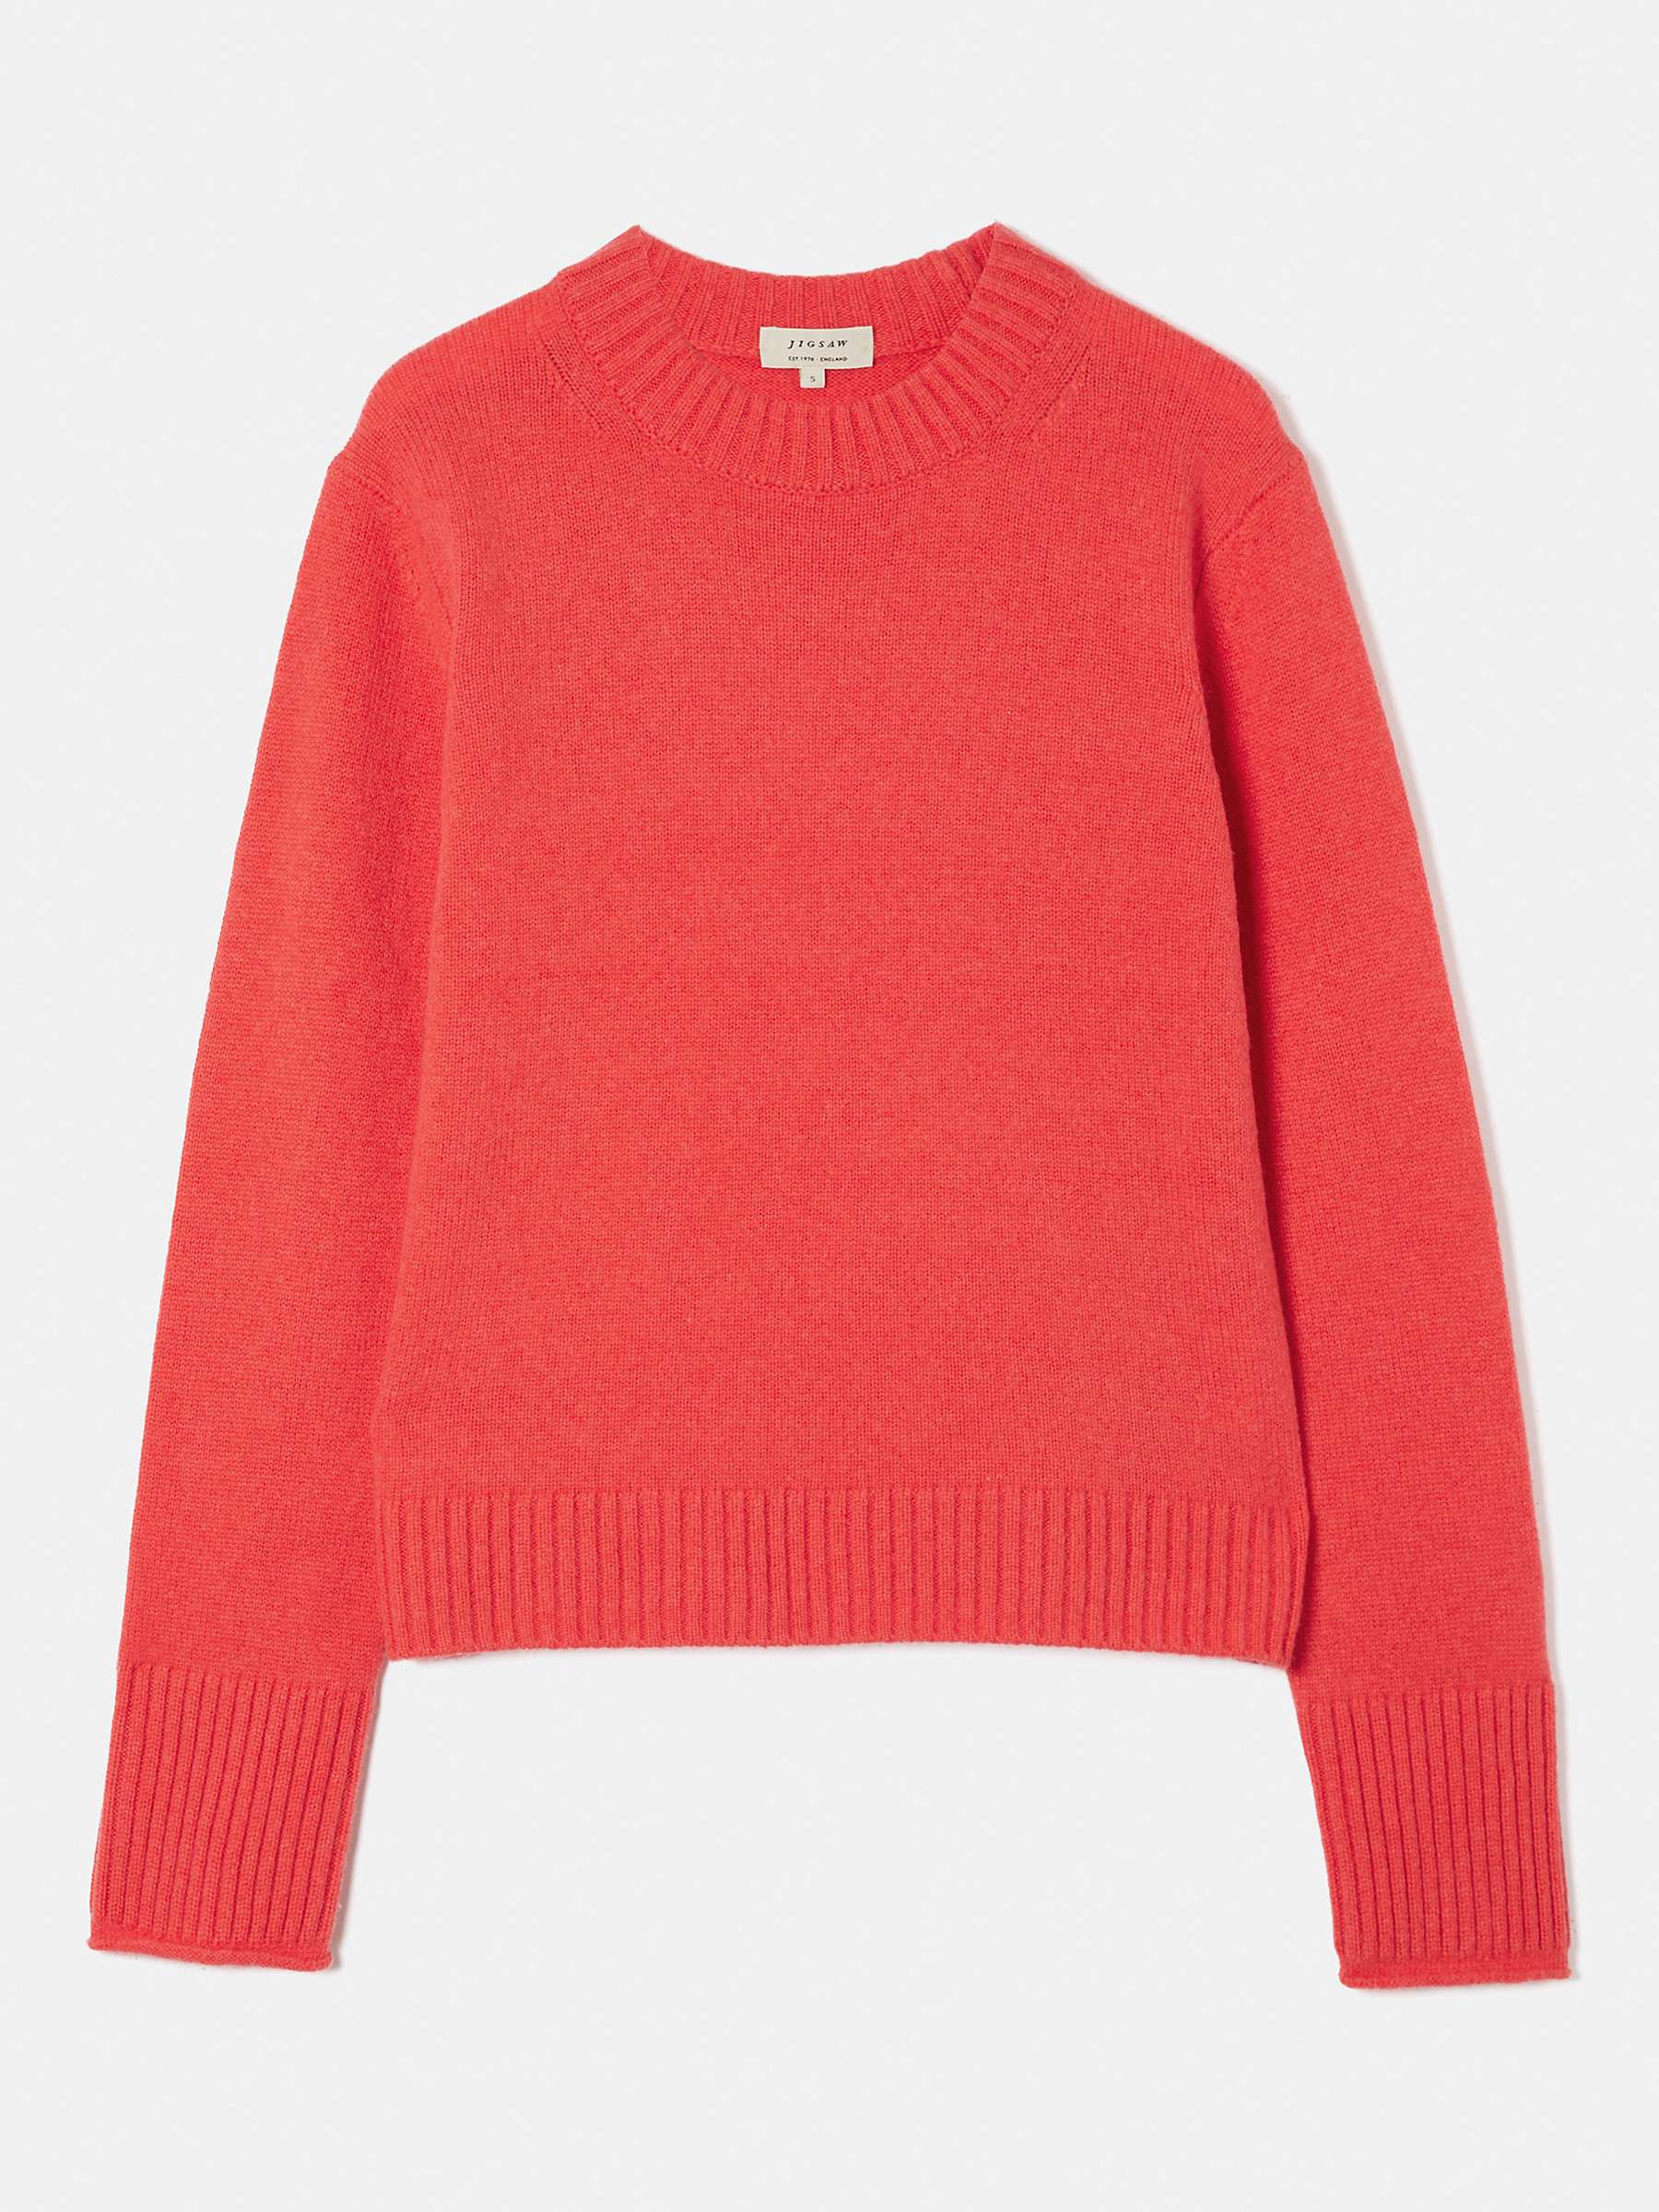 Jigsaw Compact Wool Crew Jumper, Coral at John Lewis & Partners